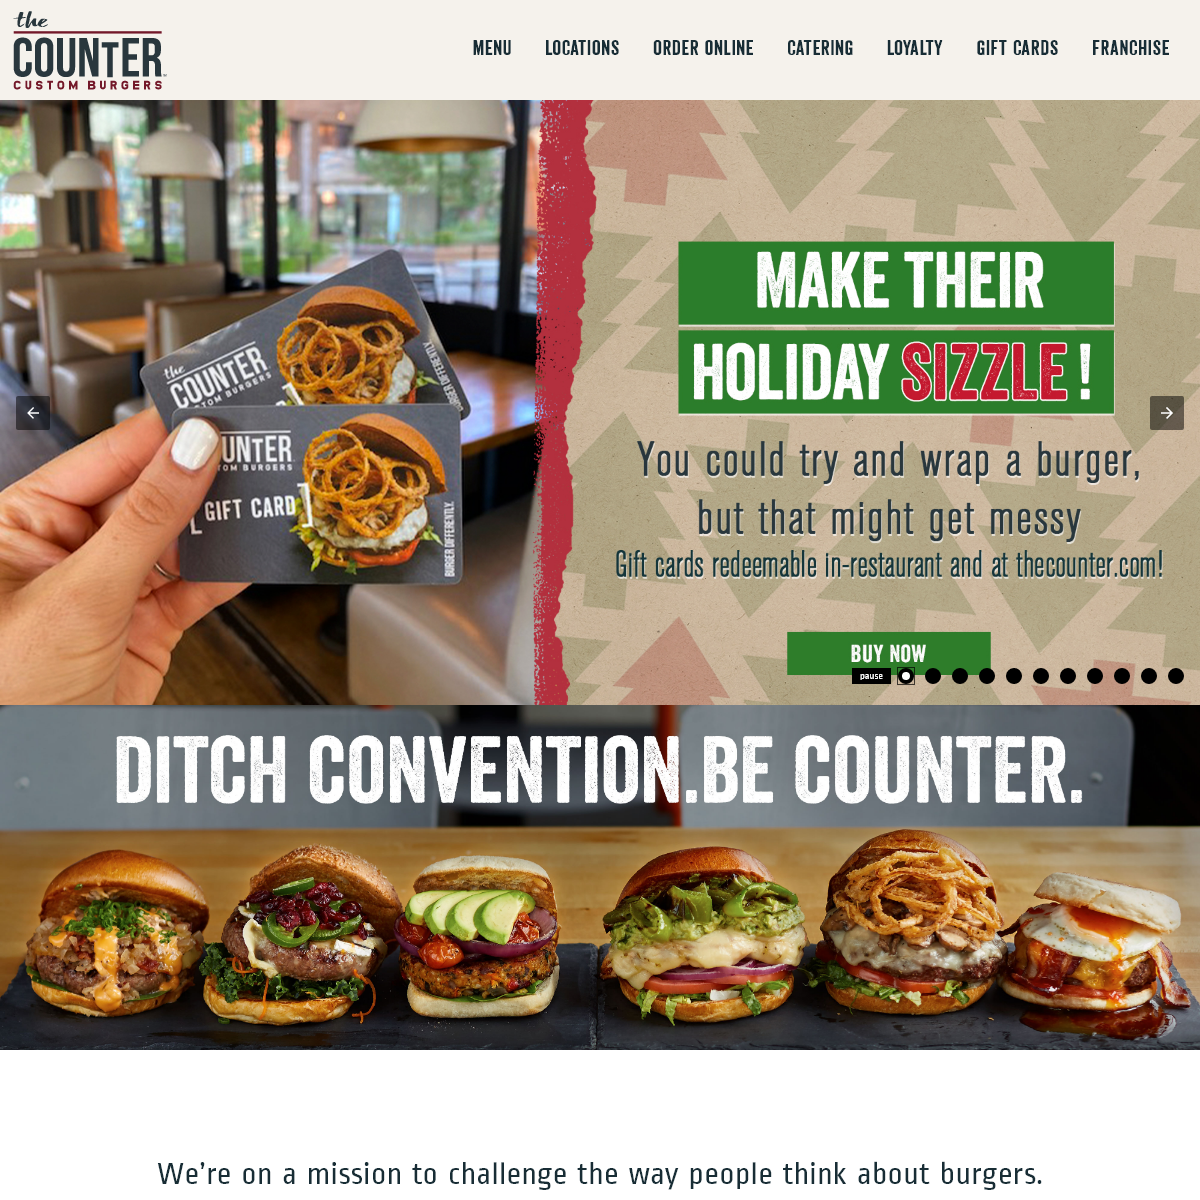 A complete backup of thecounterburger.com